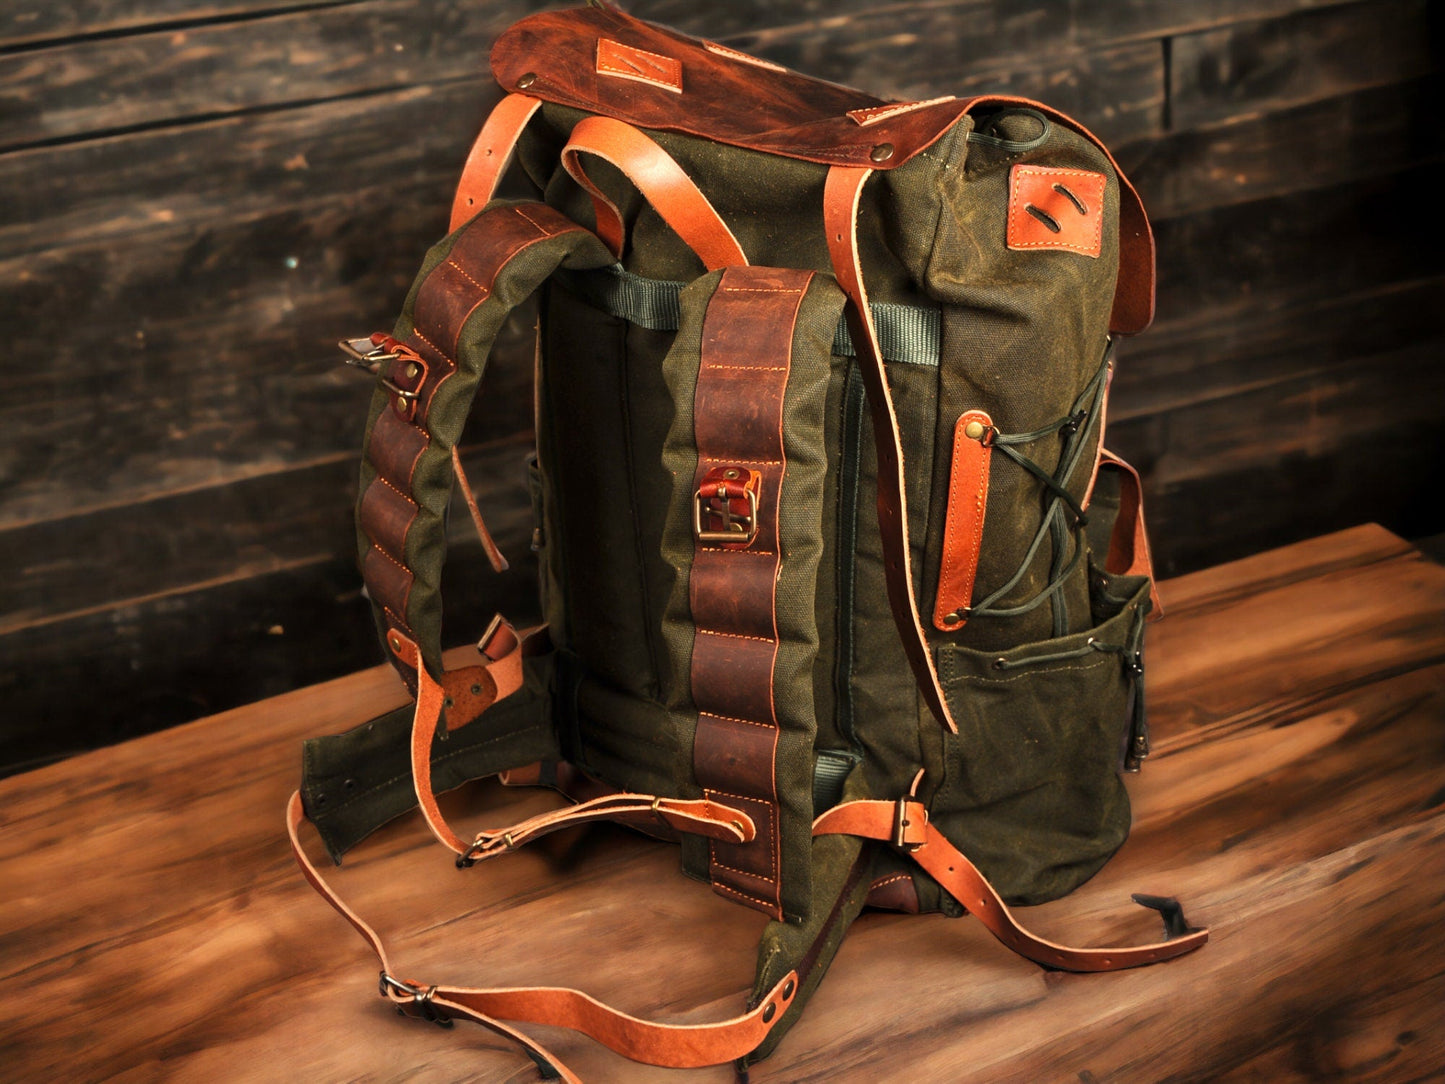 60L | Personalized | Bushcraft Backpack | Camping Backpack | Hiking Backpack | Extra large | Handmade | Leather | Waxed Canvas Backpack  99percenthandmade   